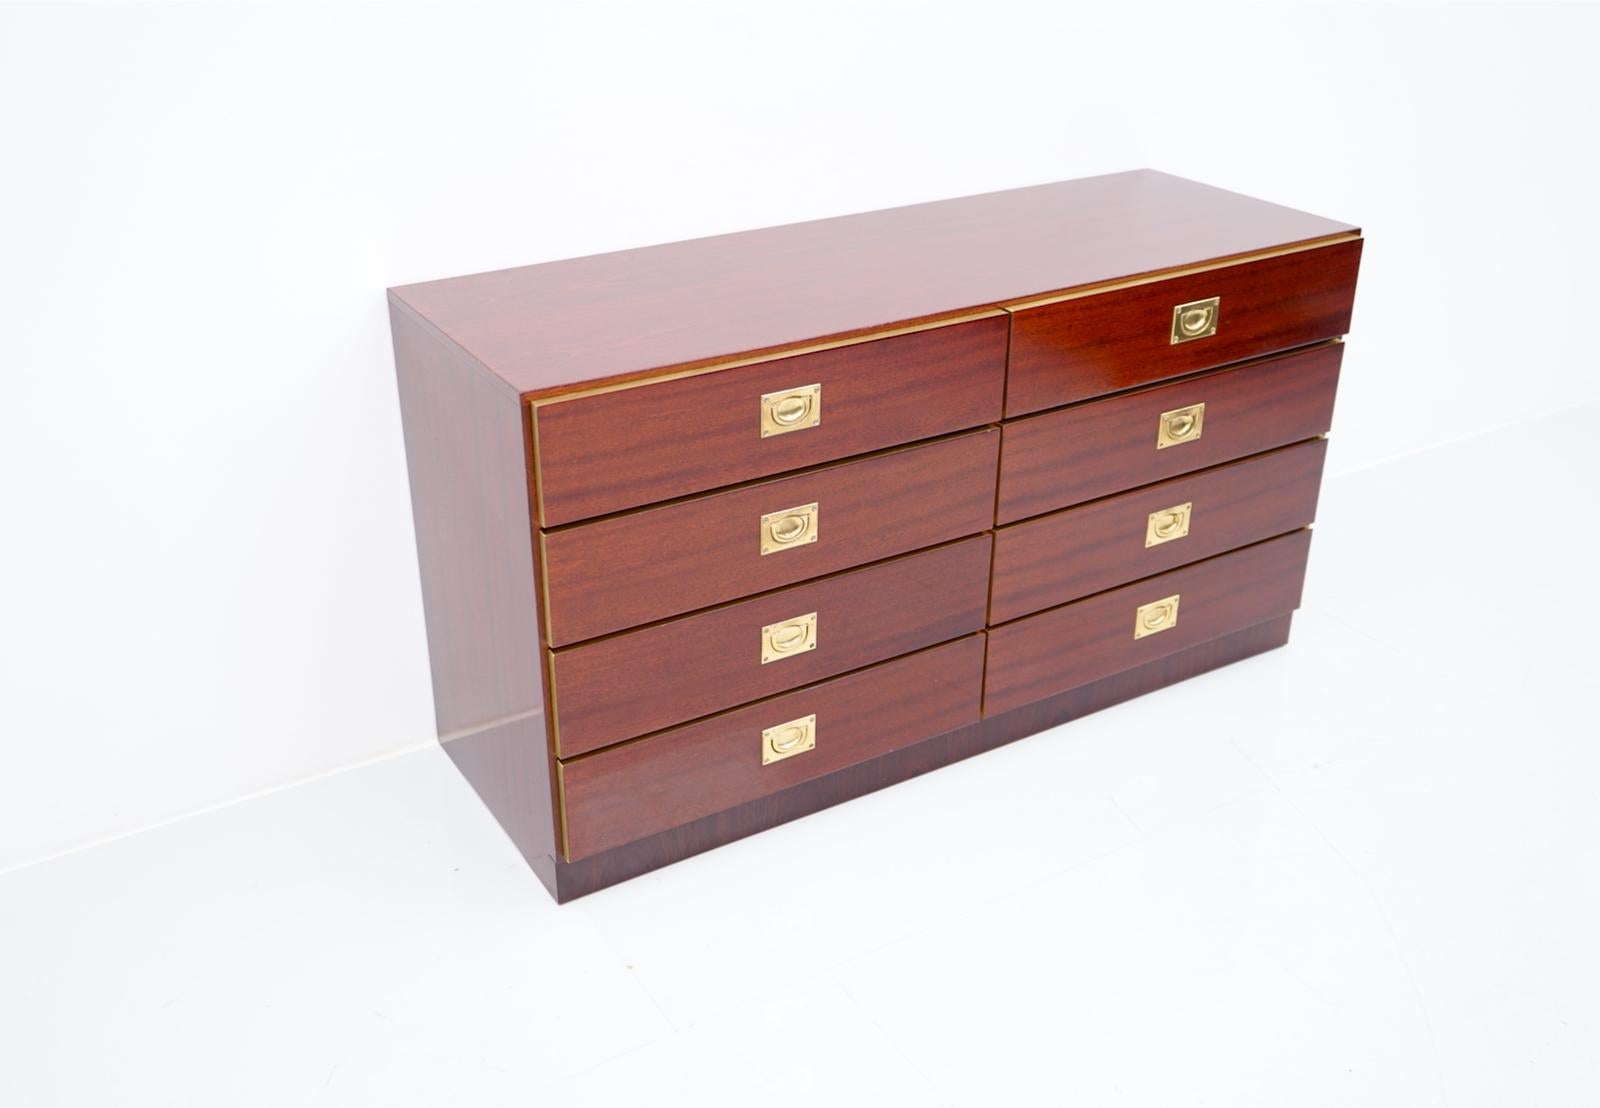 Chest of Drawers, Sideboard in Mahogany and Brass, 1970s For Sale 4